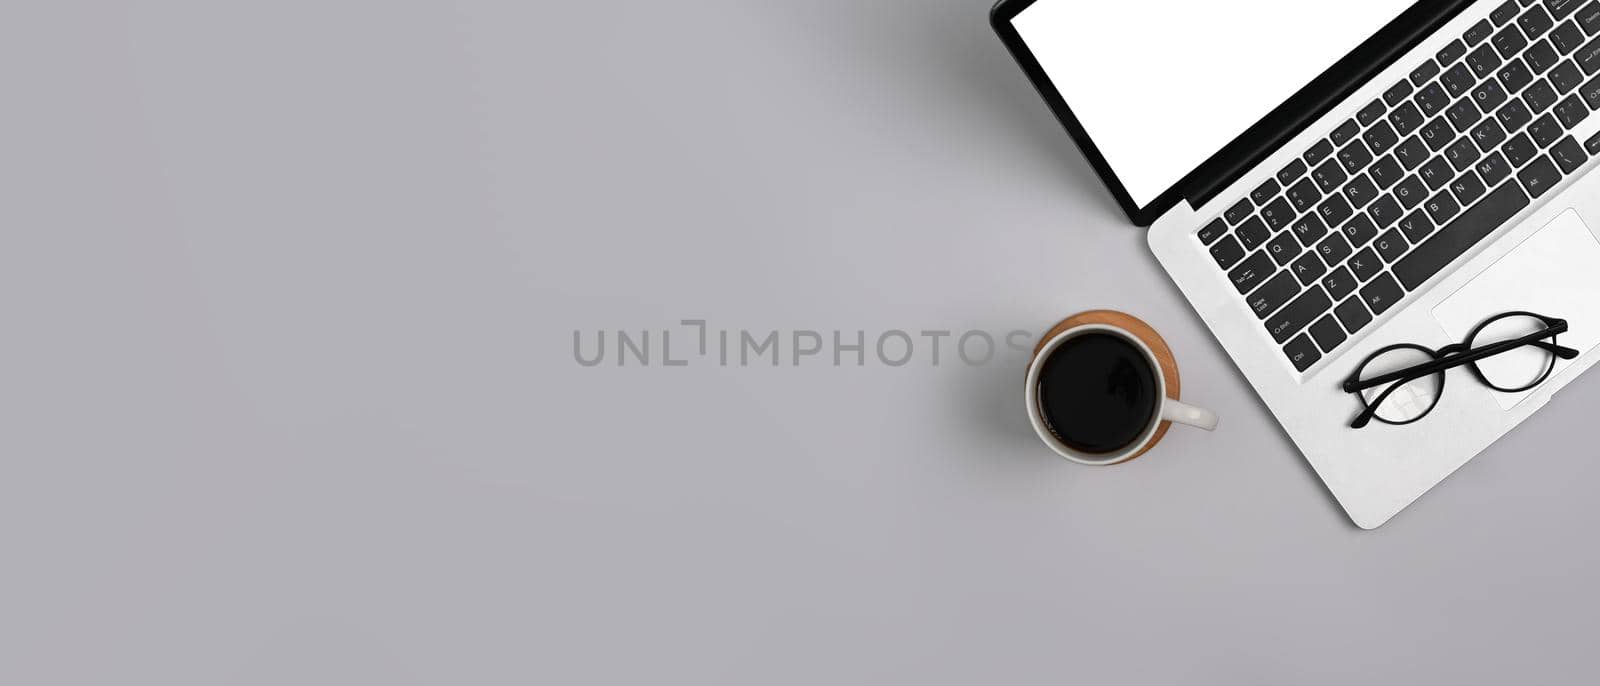 Flat lay laptop with empty display, eyeglasses and coffee cup on white background. Copy space for your text.